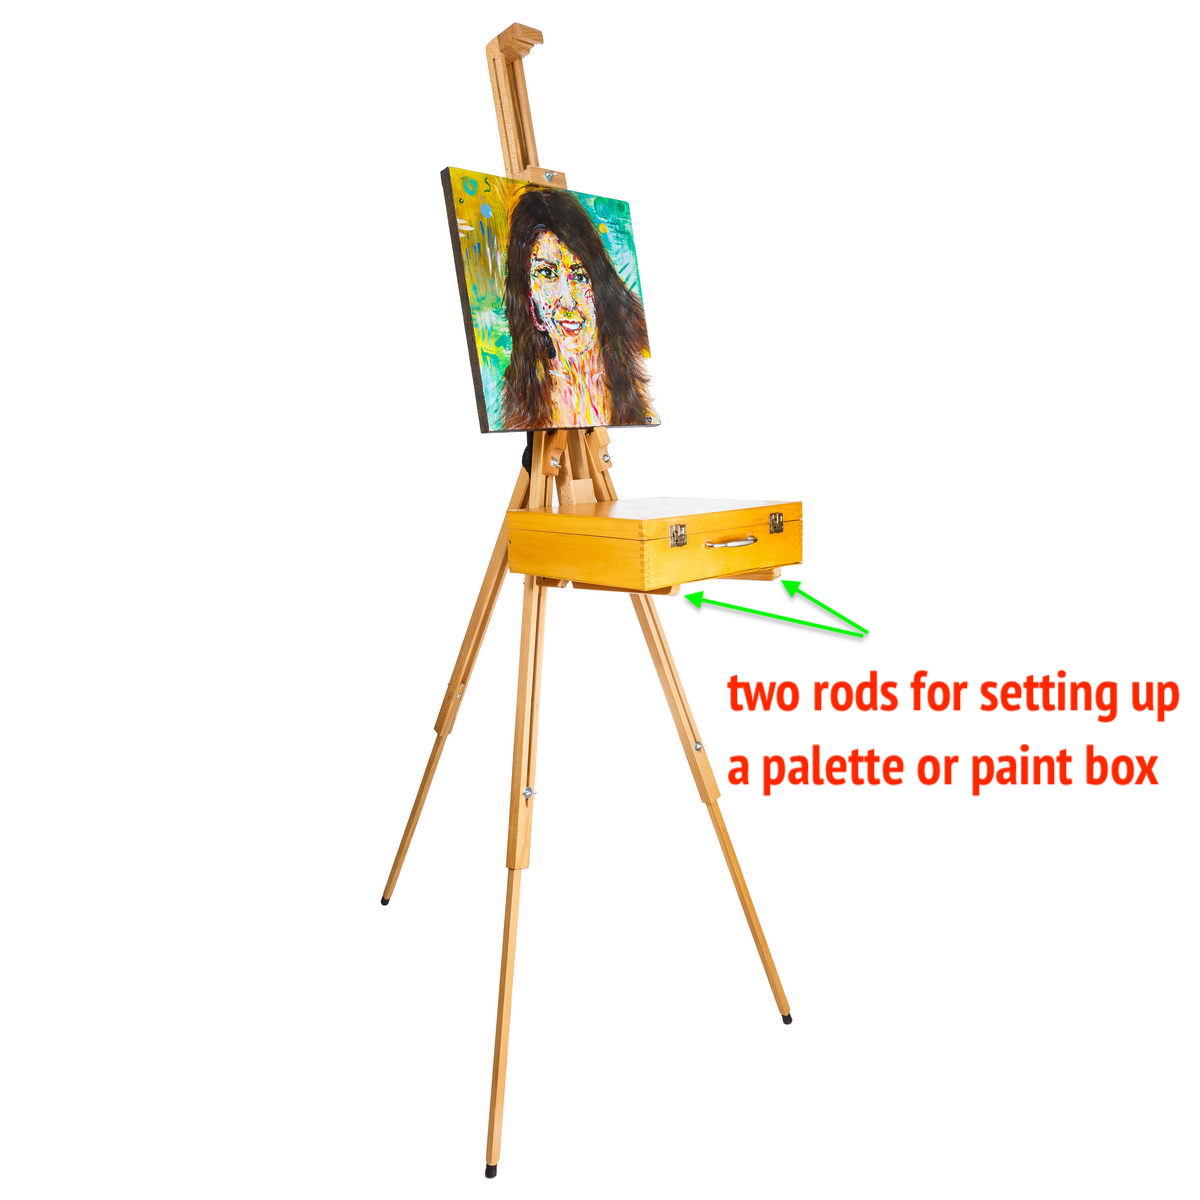 WOODEN EASEL STAND > Wooden Floor Easel Stand, 30x71 Tripod Art